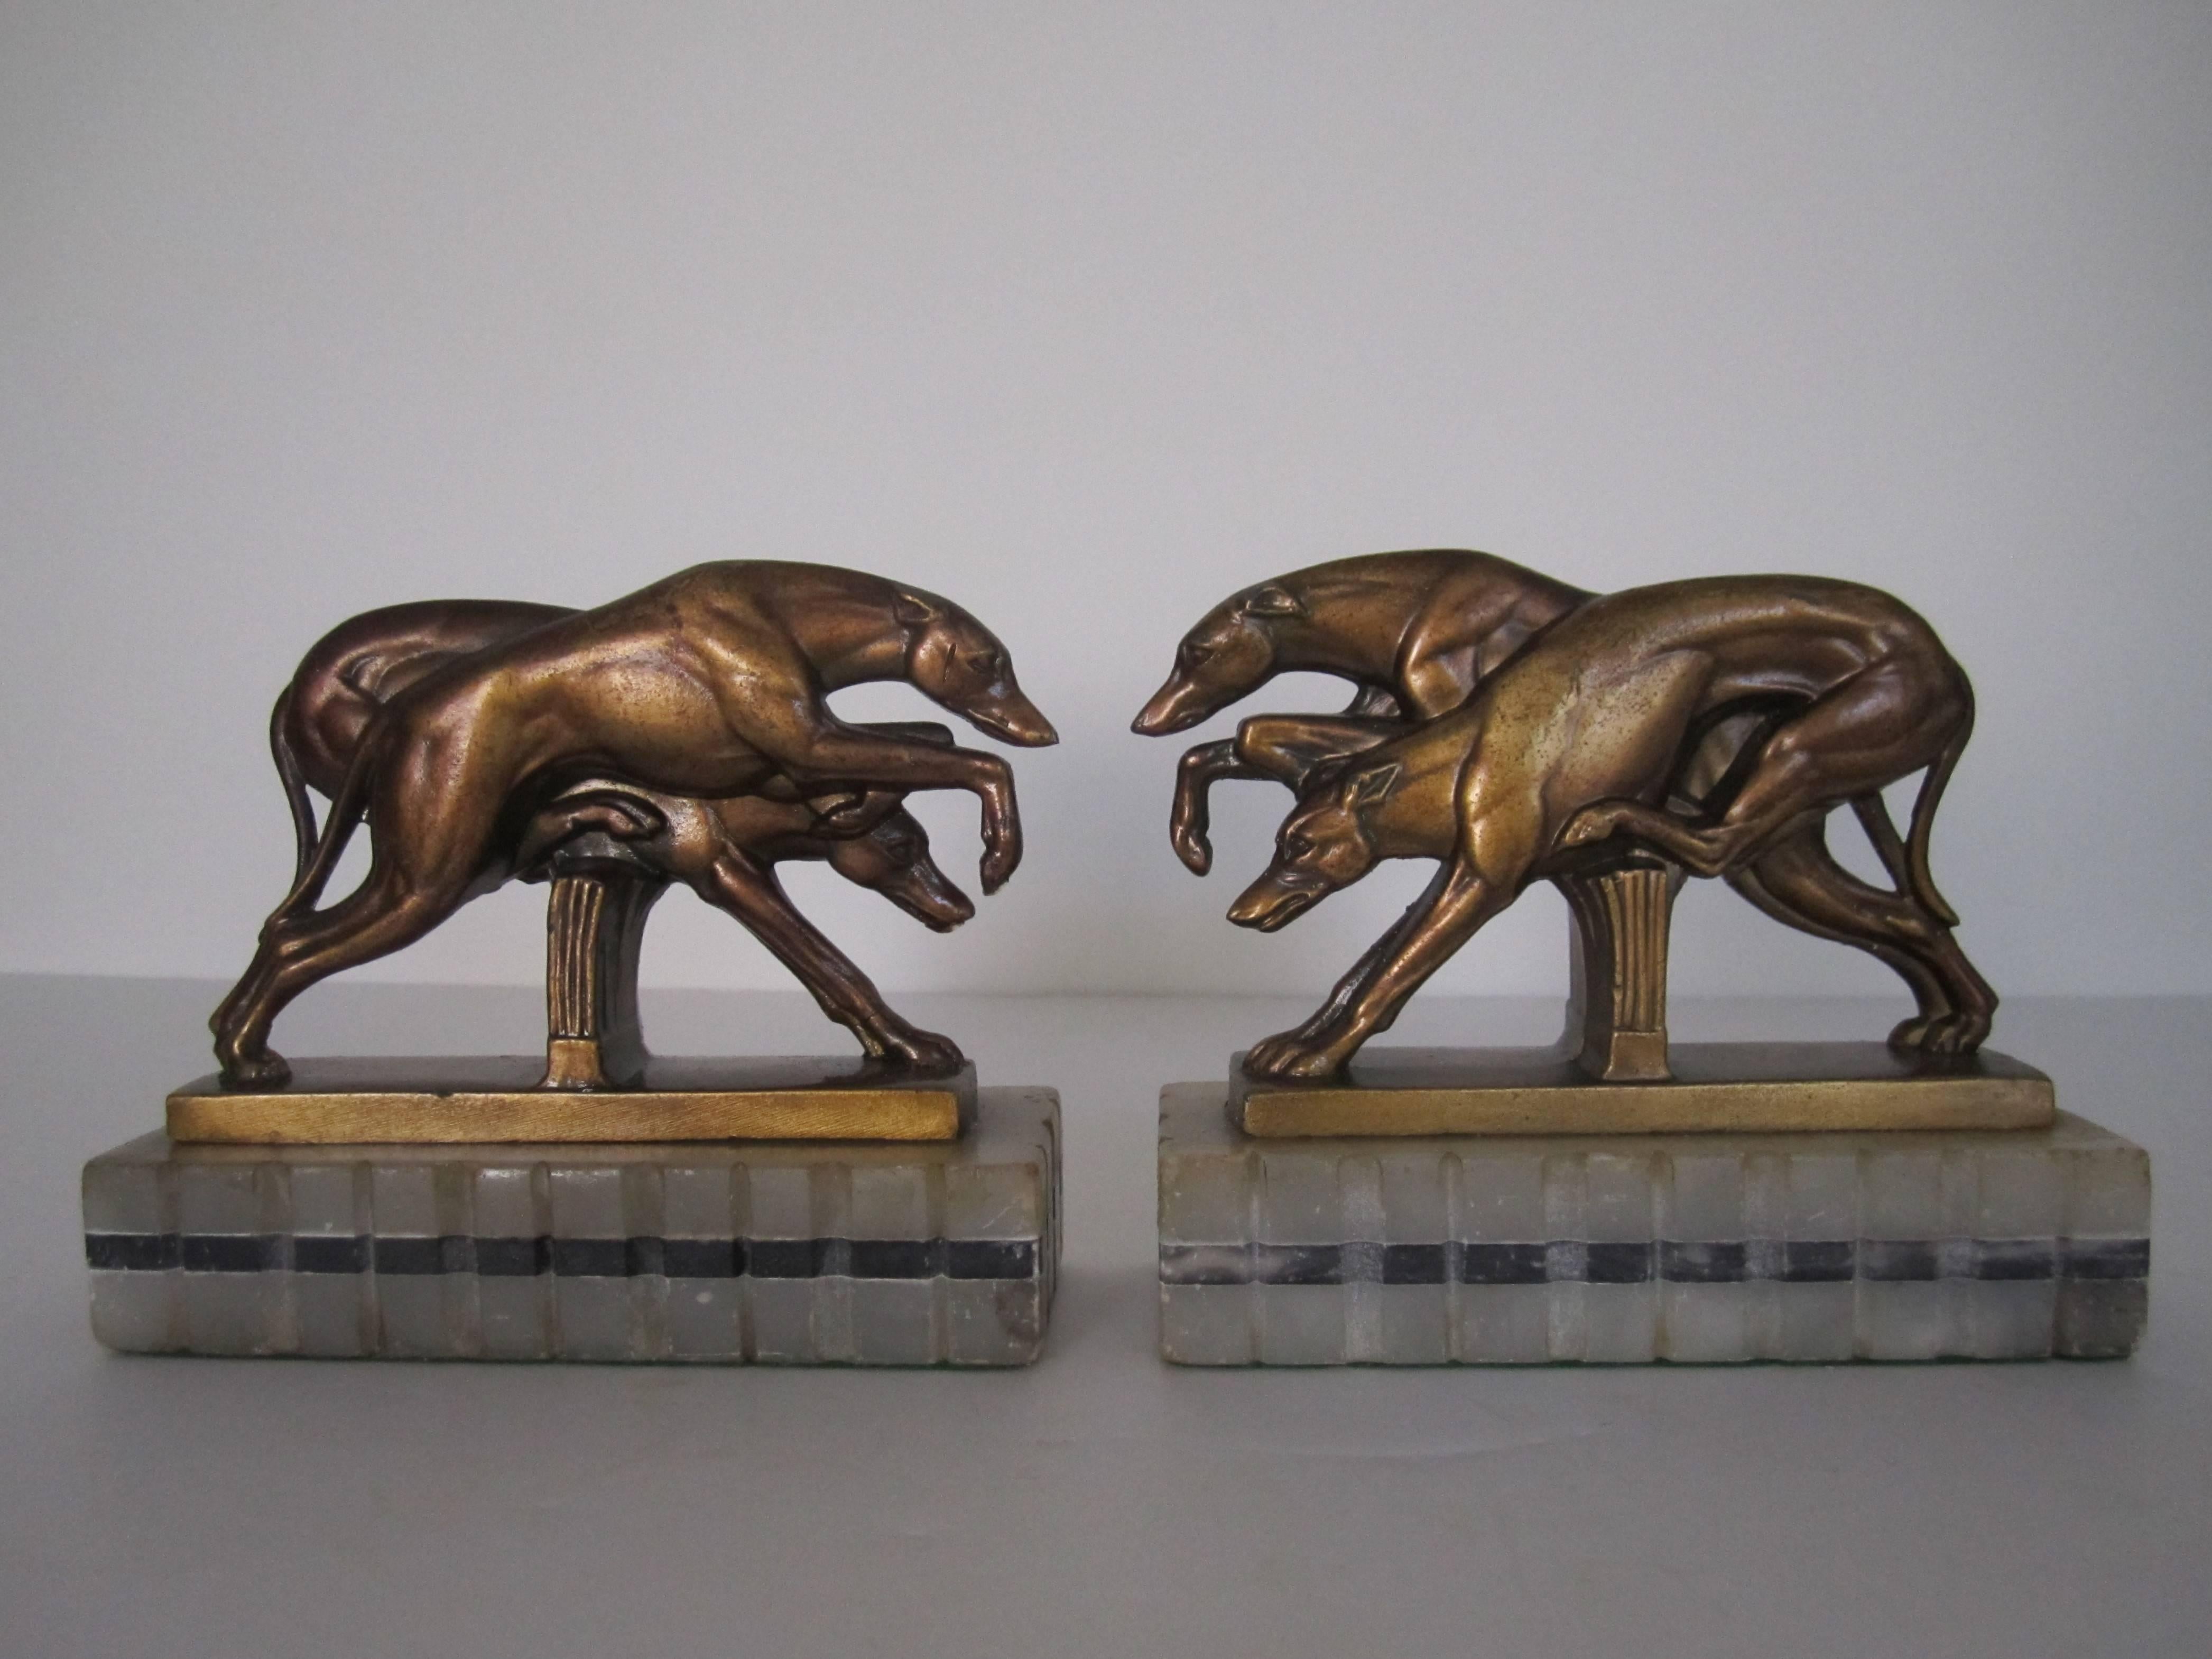 Vintage Art Deco Greyhound Dog Bookends on Black and White Marble Bases, 1920s 1